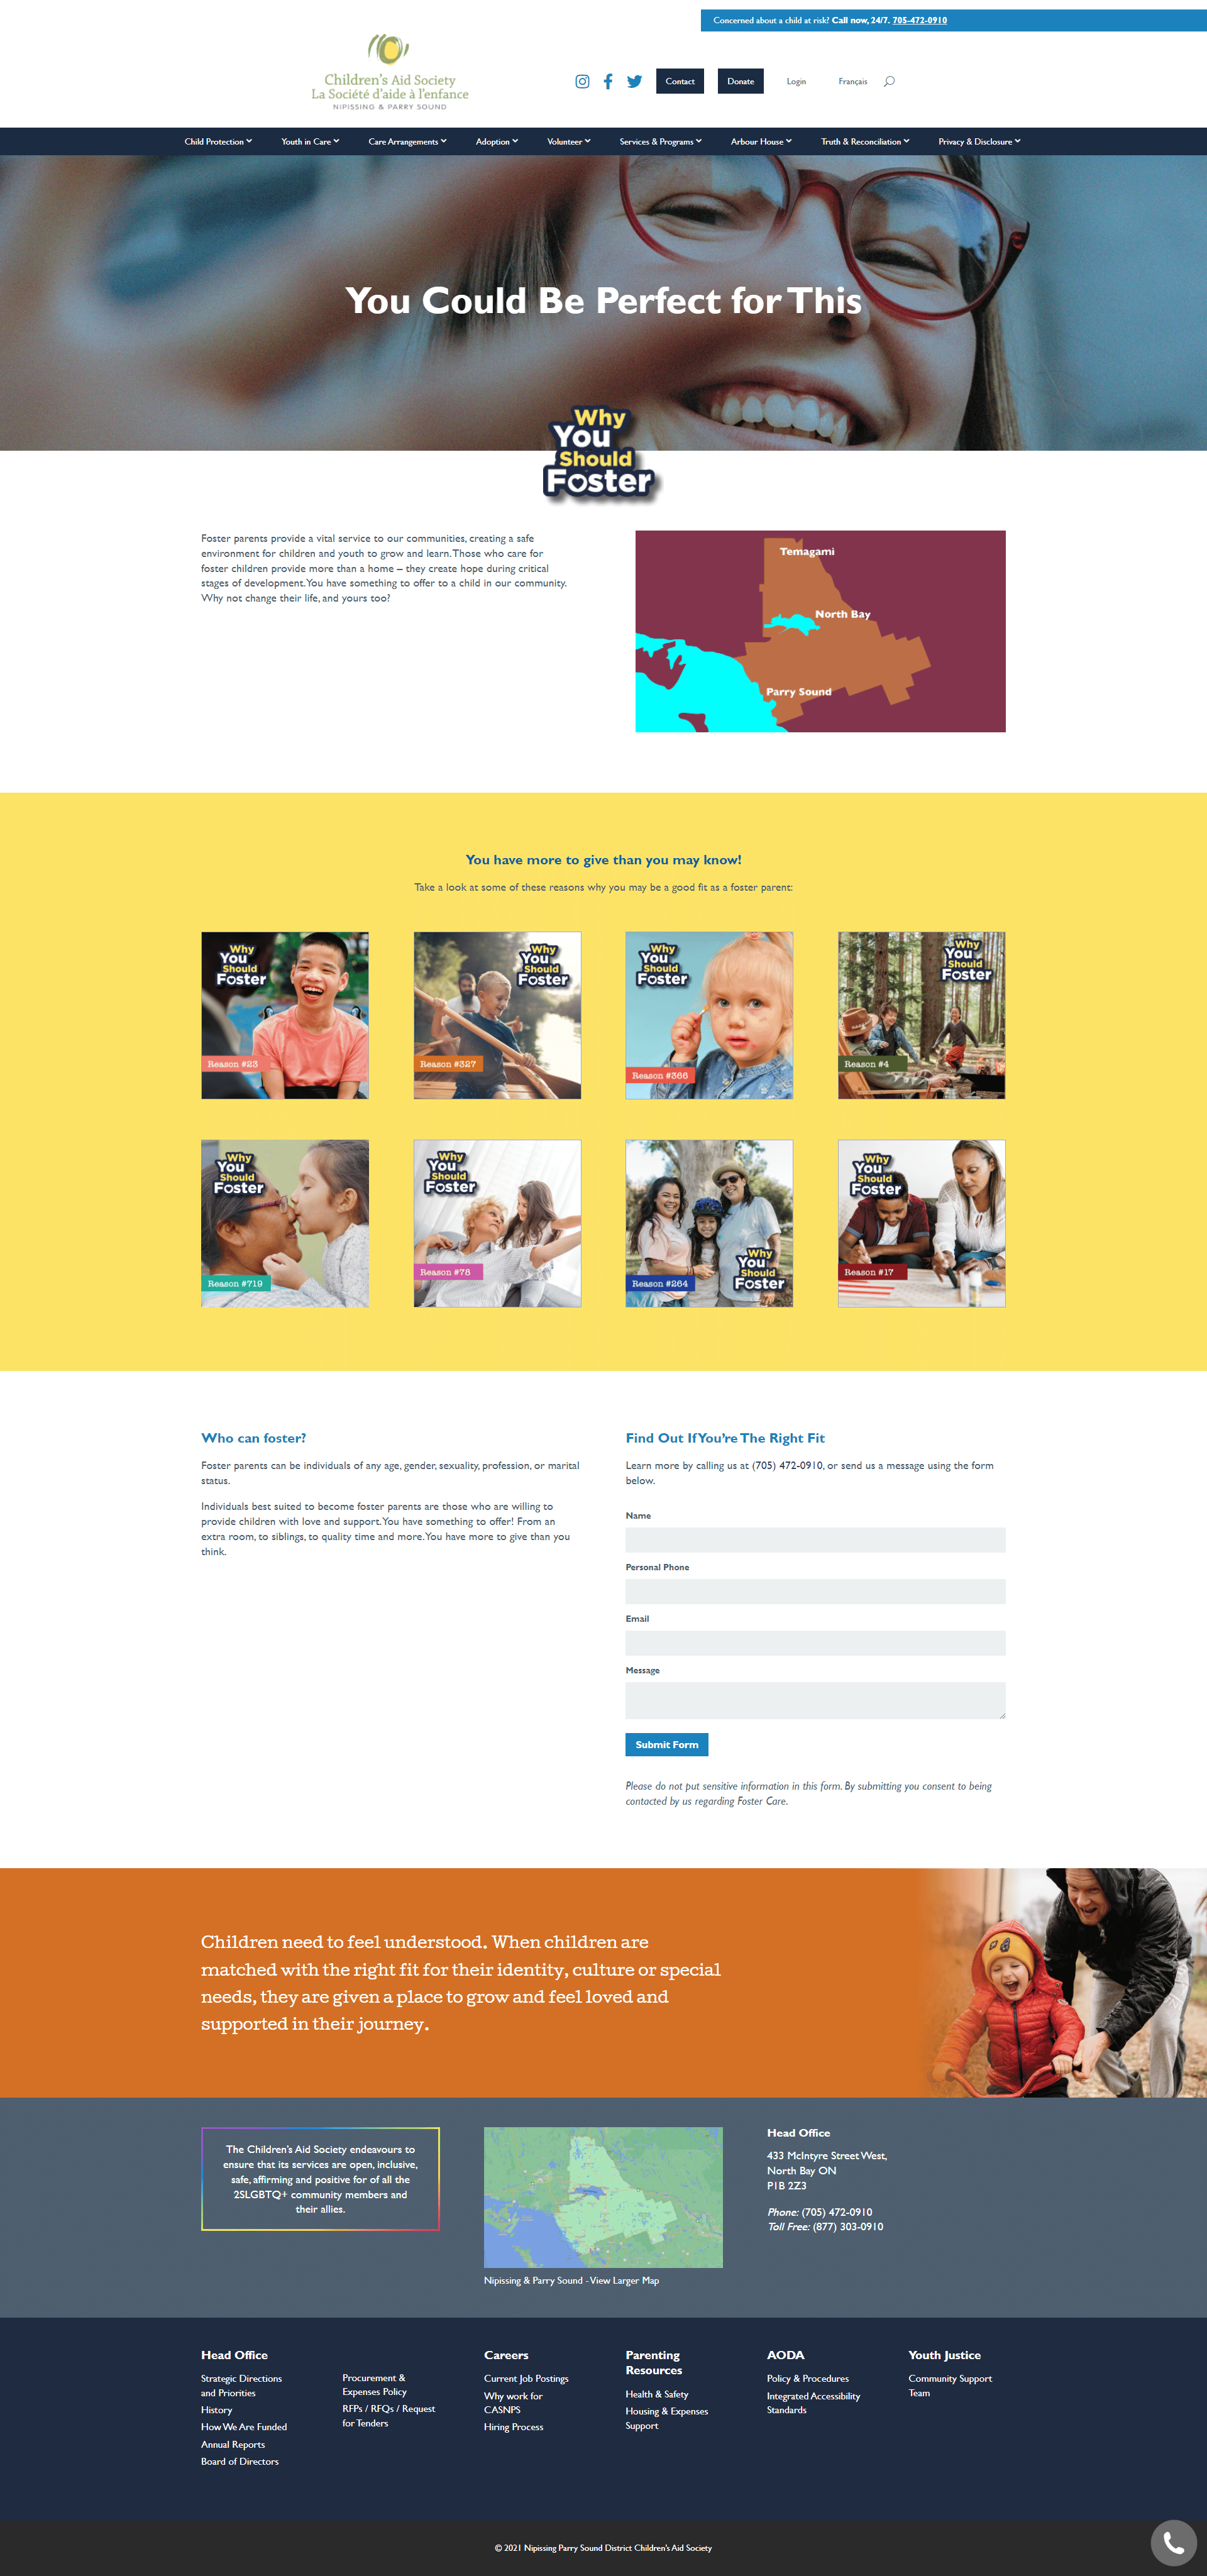 CAS - Foster Care landing page